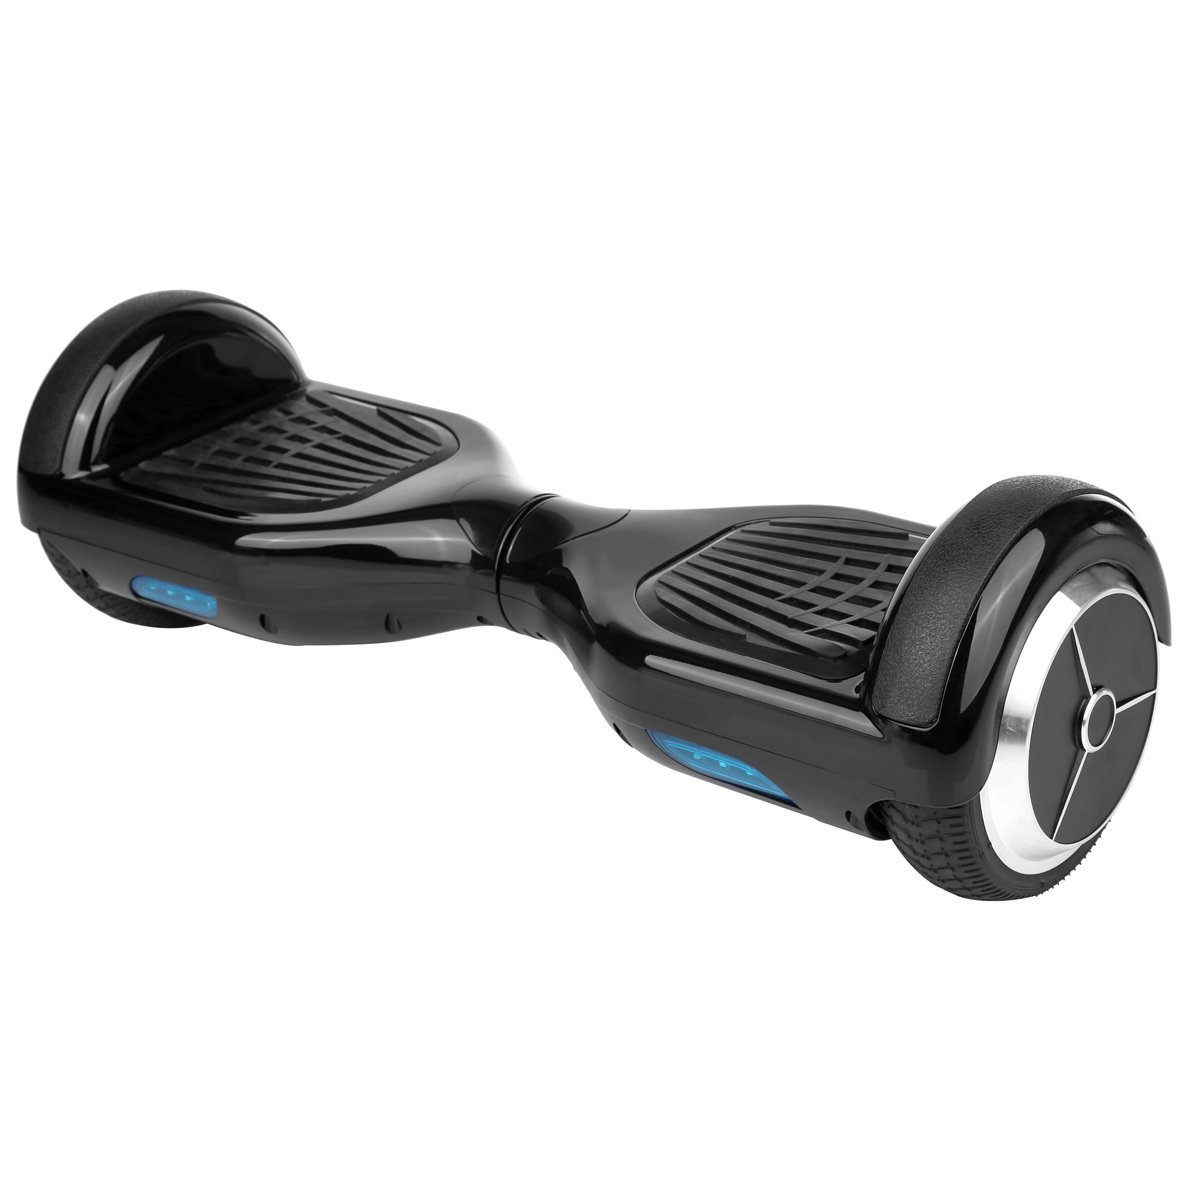 Gyroscopic scooter